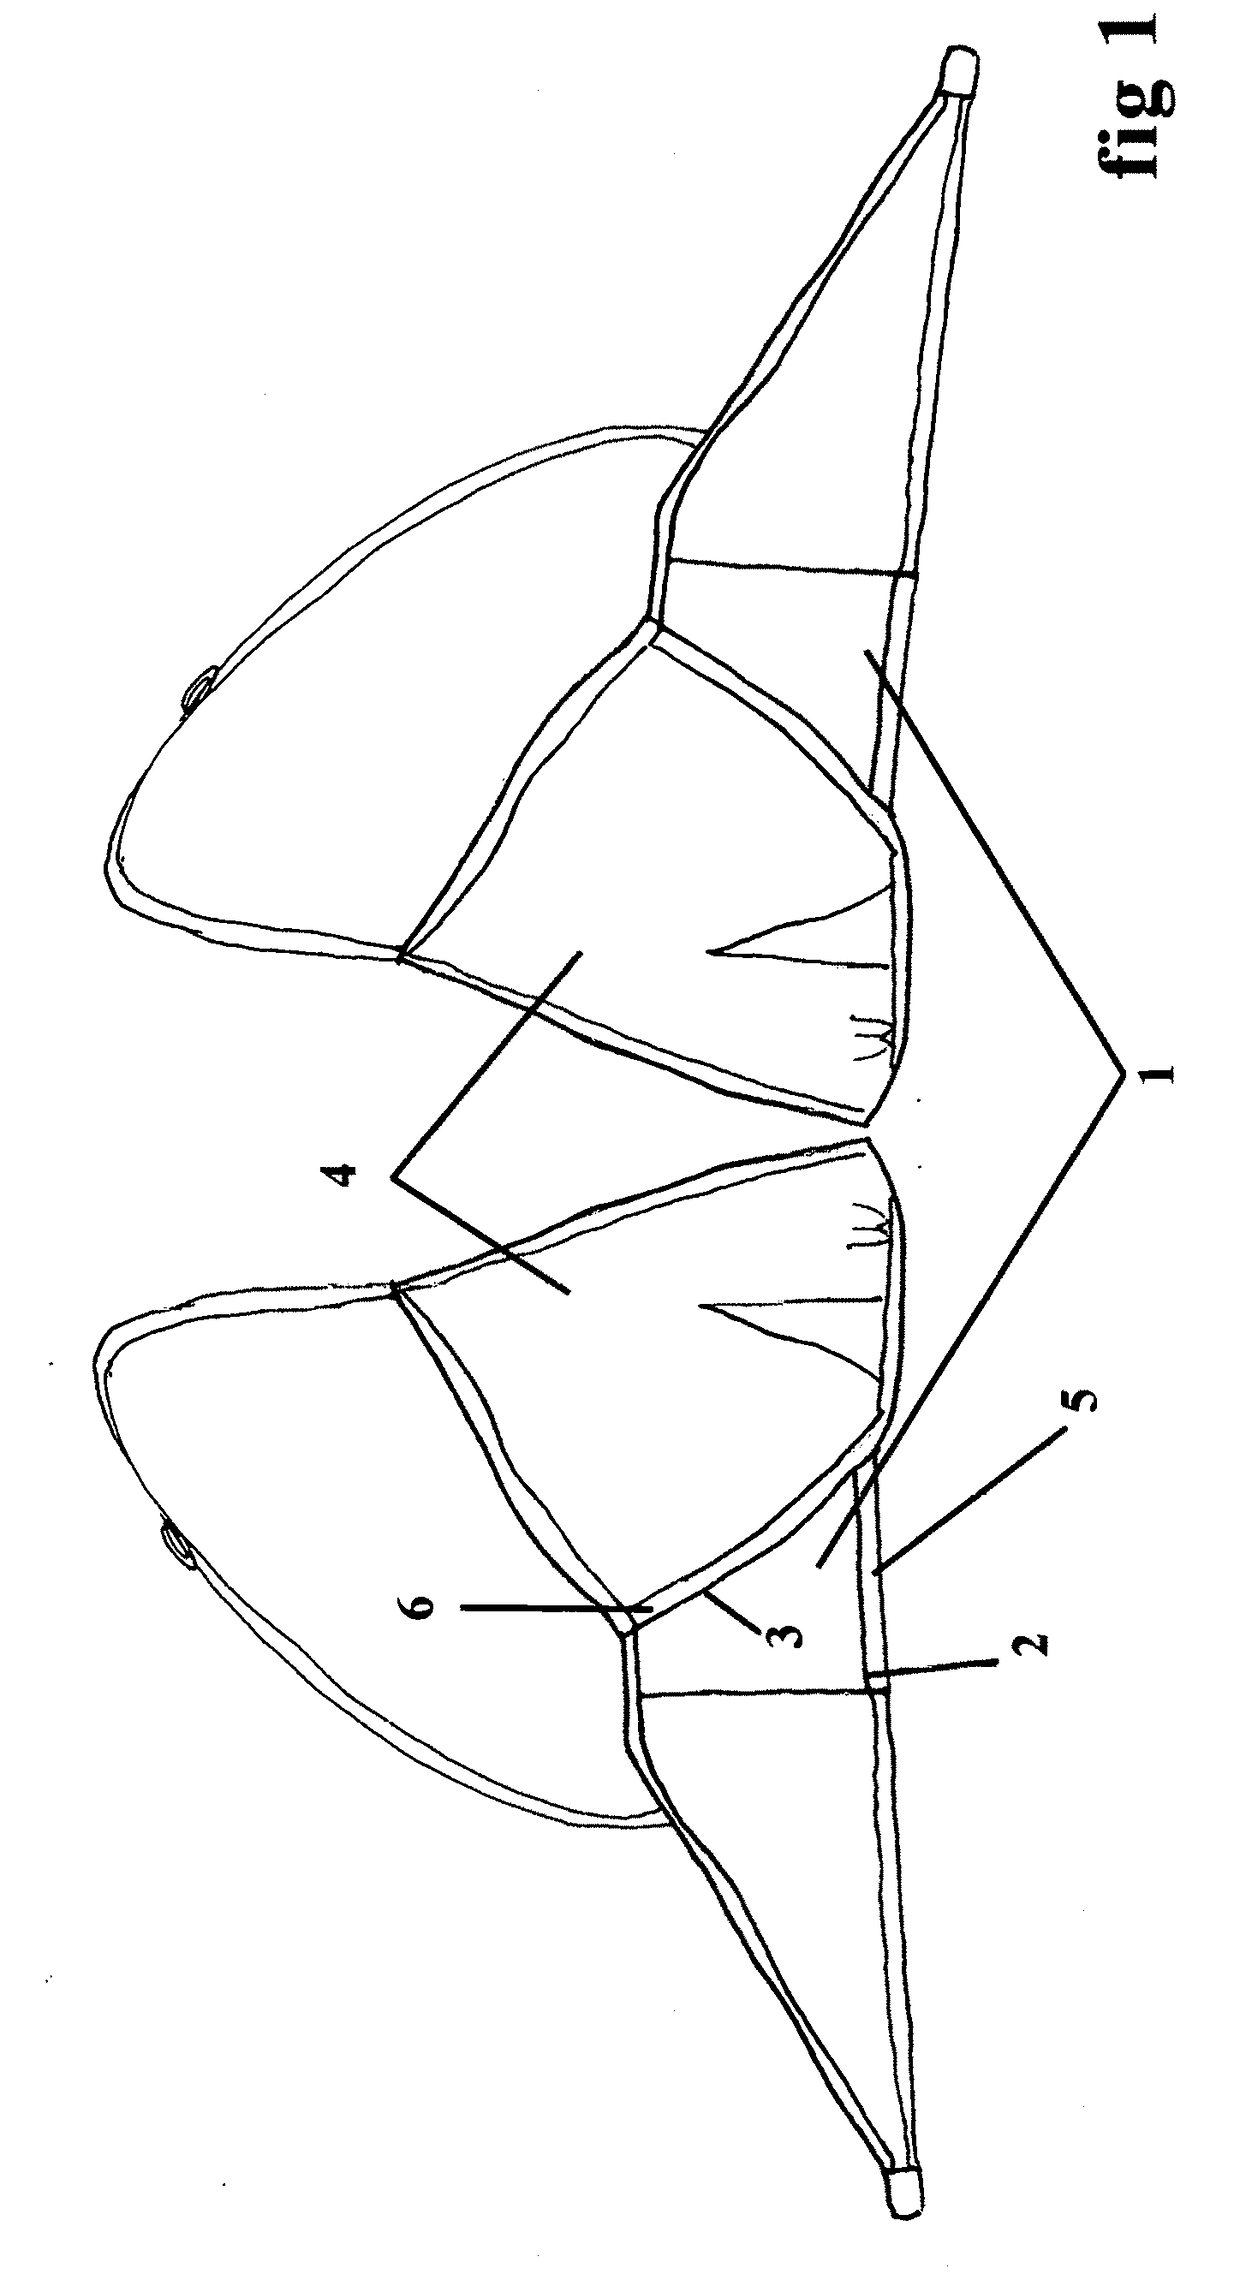 Flexible support structure for wire-free bras, bralettes and lingerie